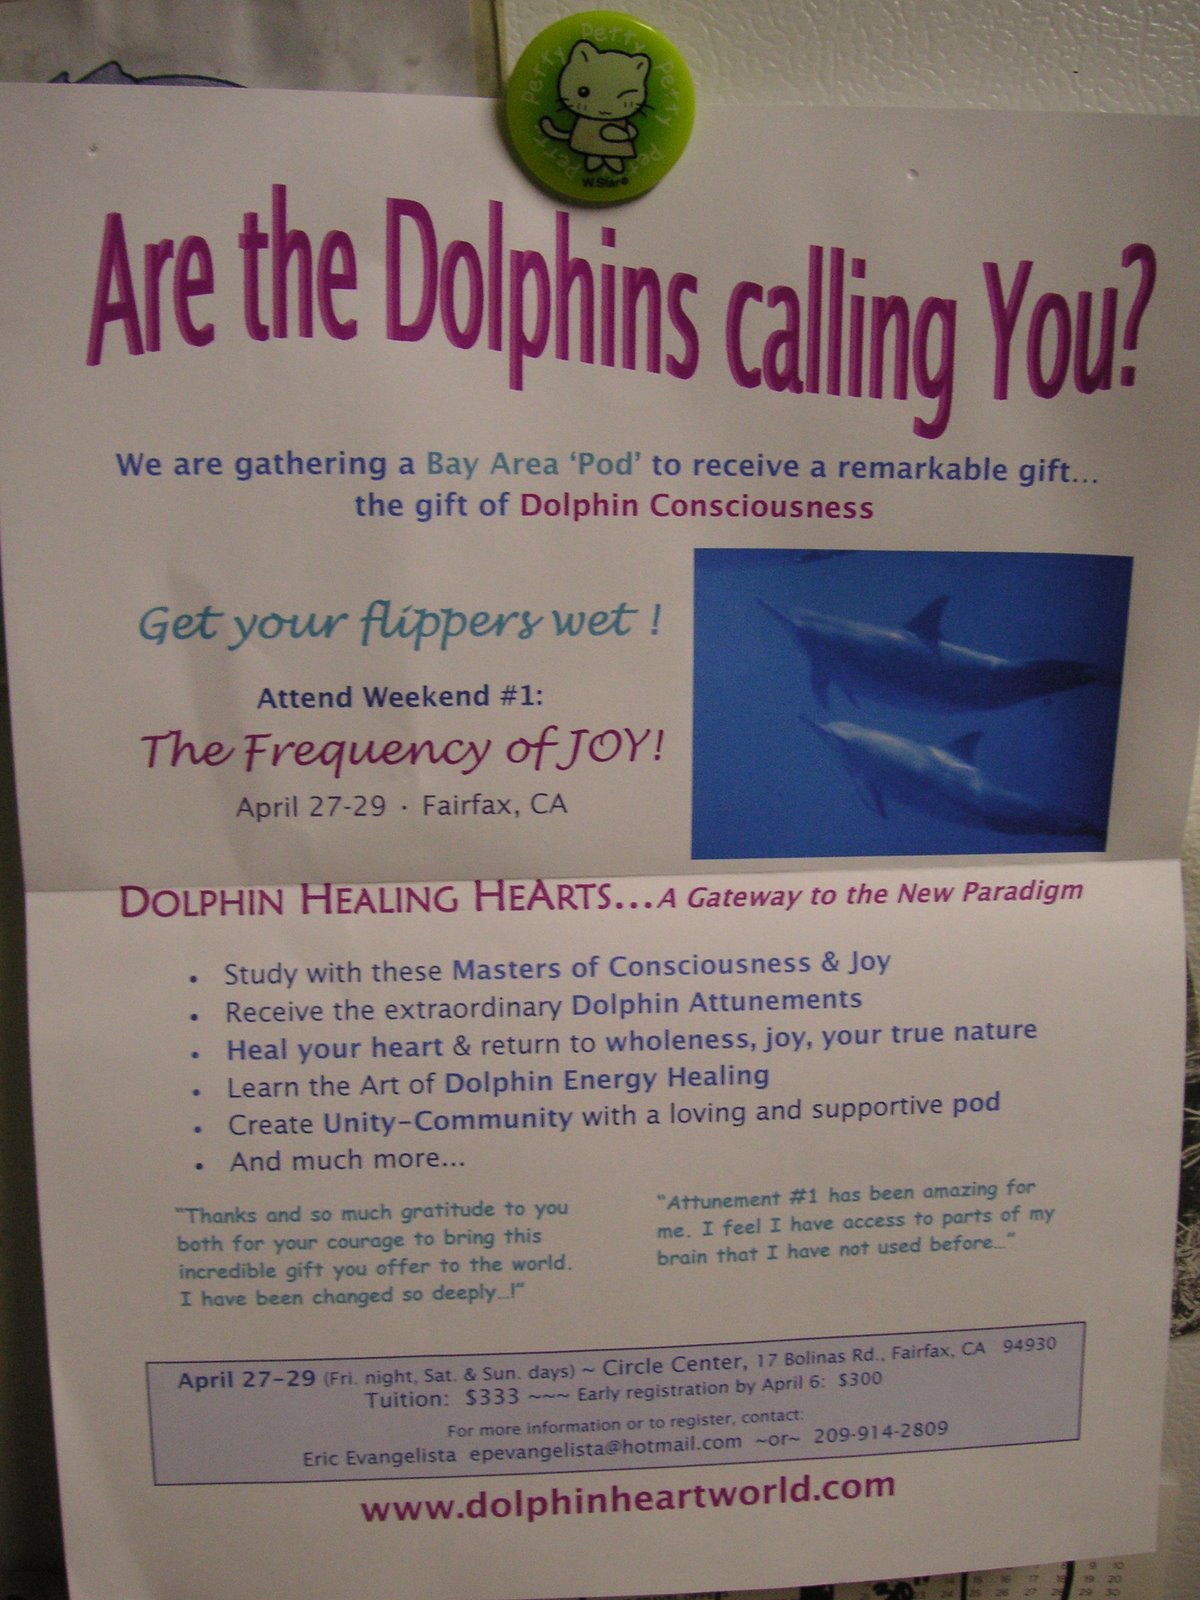 [Dolphins+calling+you.jpg]